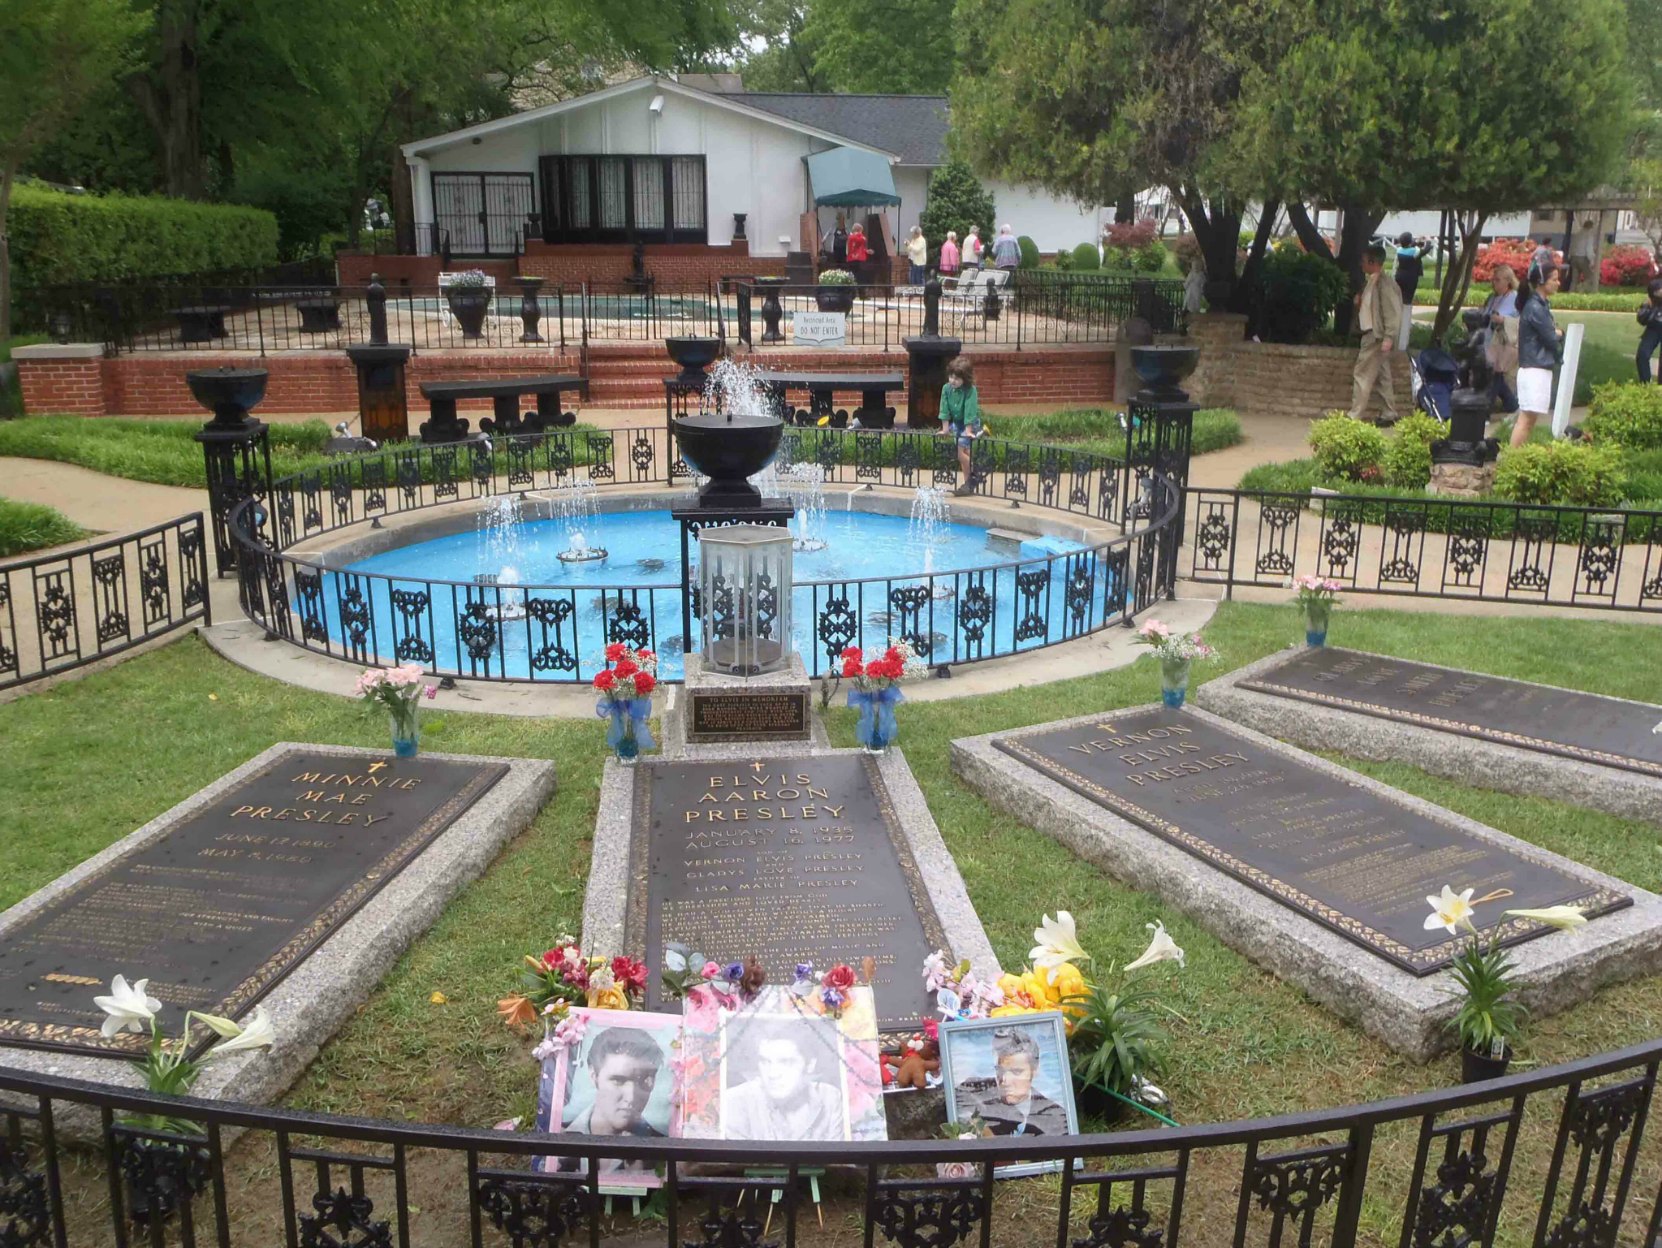 The graves of Elvis Presley, his mother Gladys Presley, his father Vernon Presley and his grandmother Minnie Mae Presley, Graceland, Memphis Tennessee